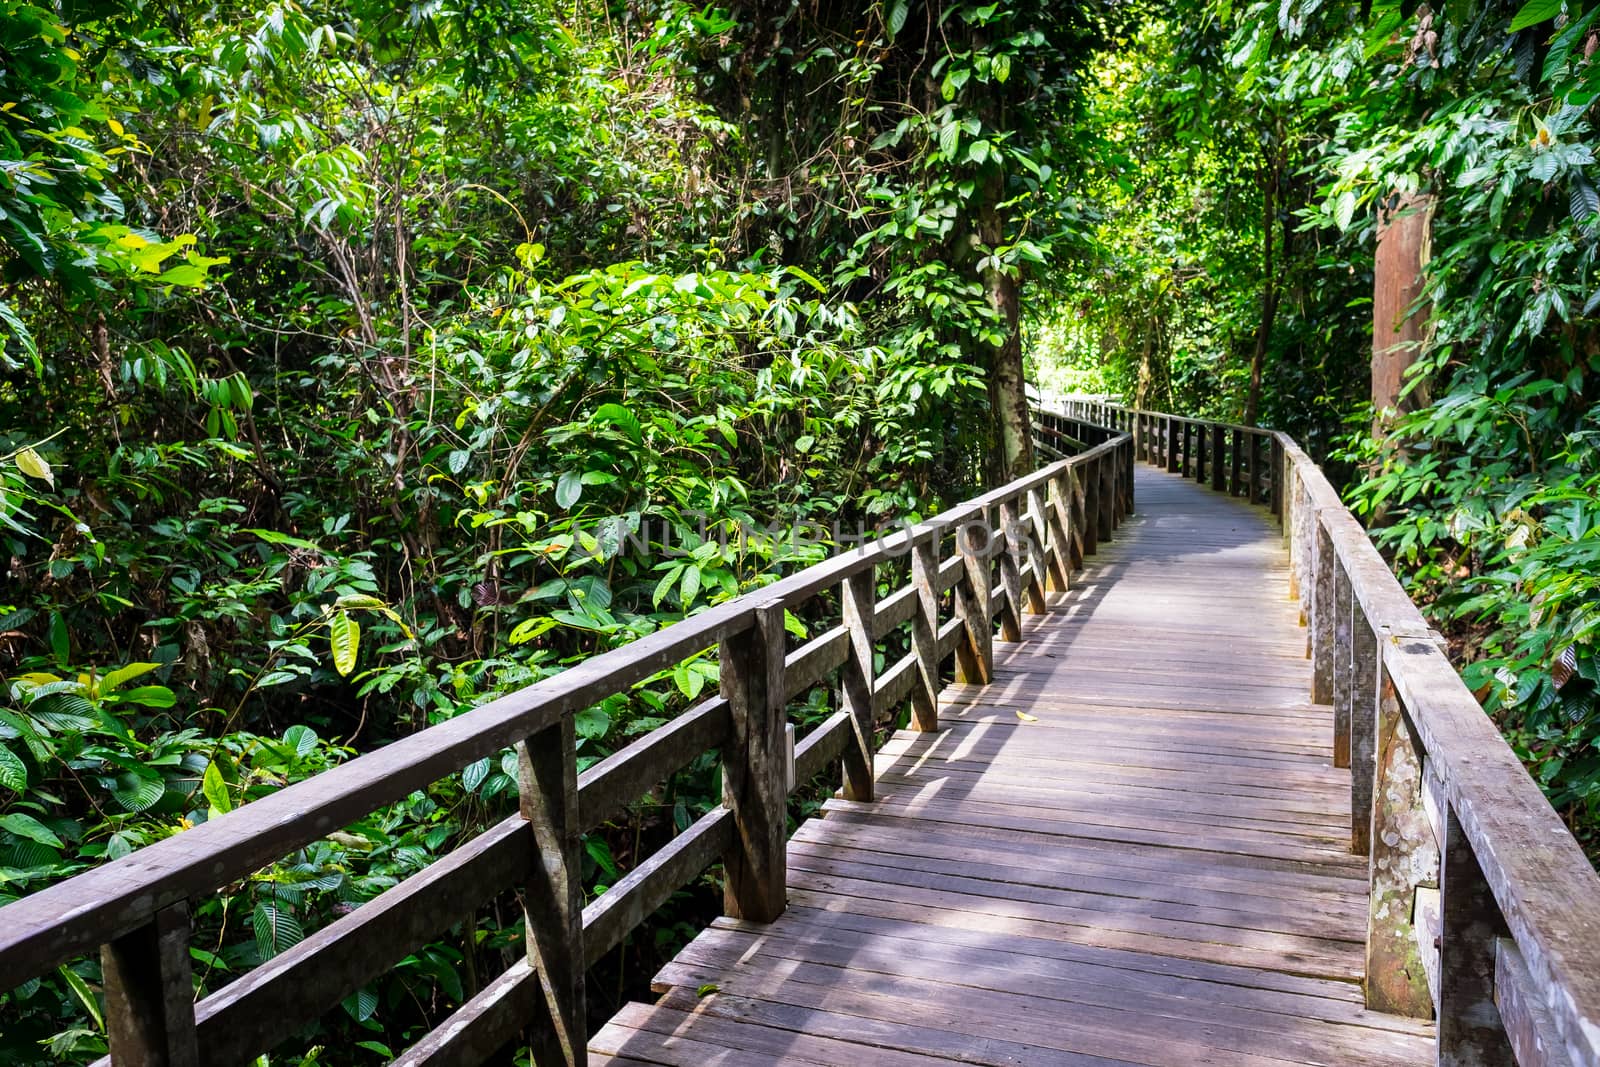 Wooden path in tropical rainforest